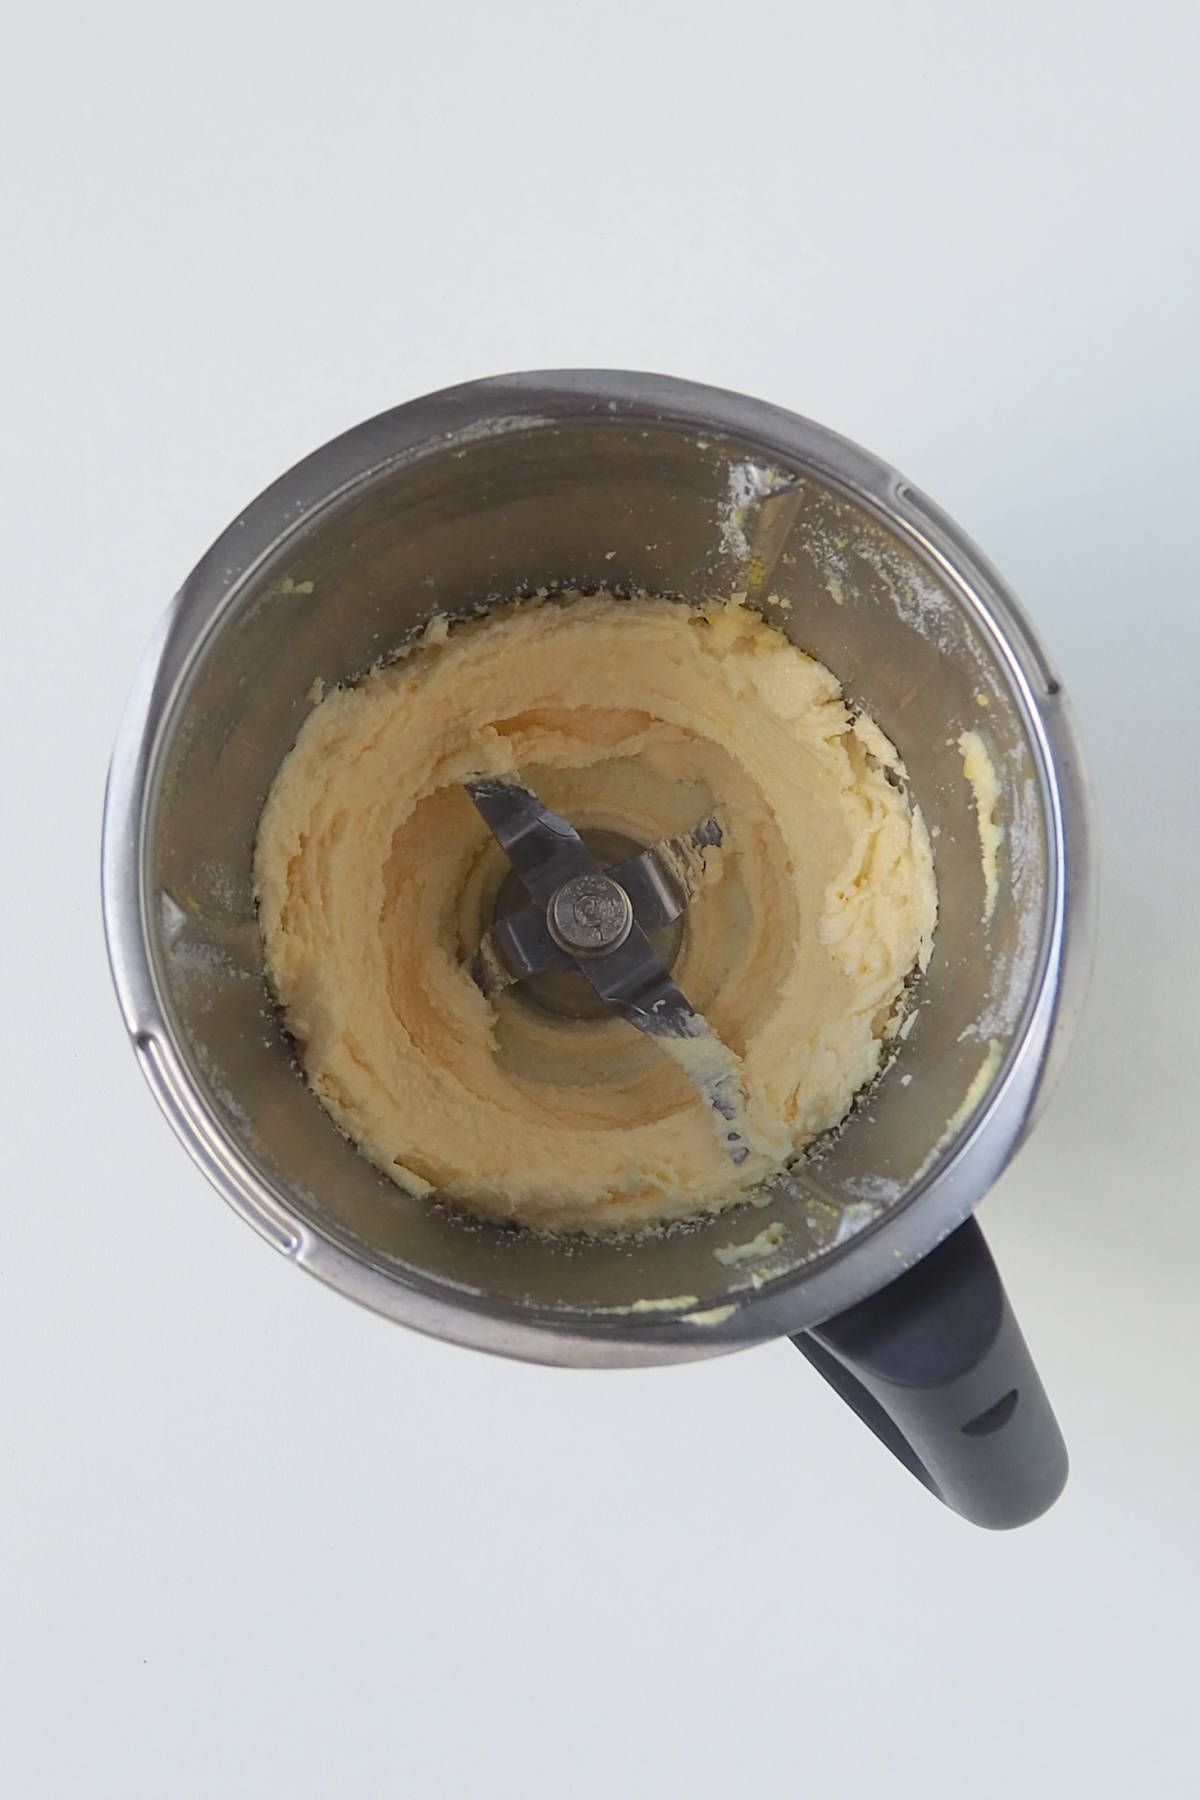 creamed butter, sugar and orange zest in a thermomix bowl.